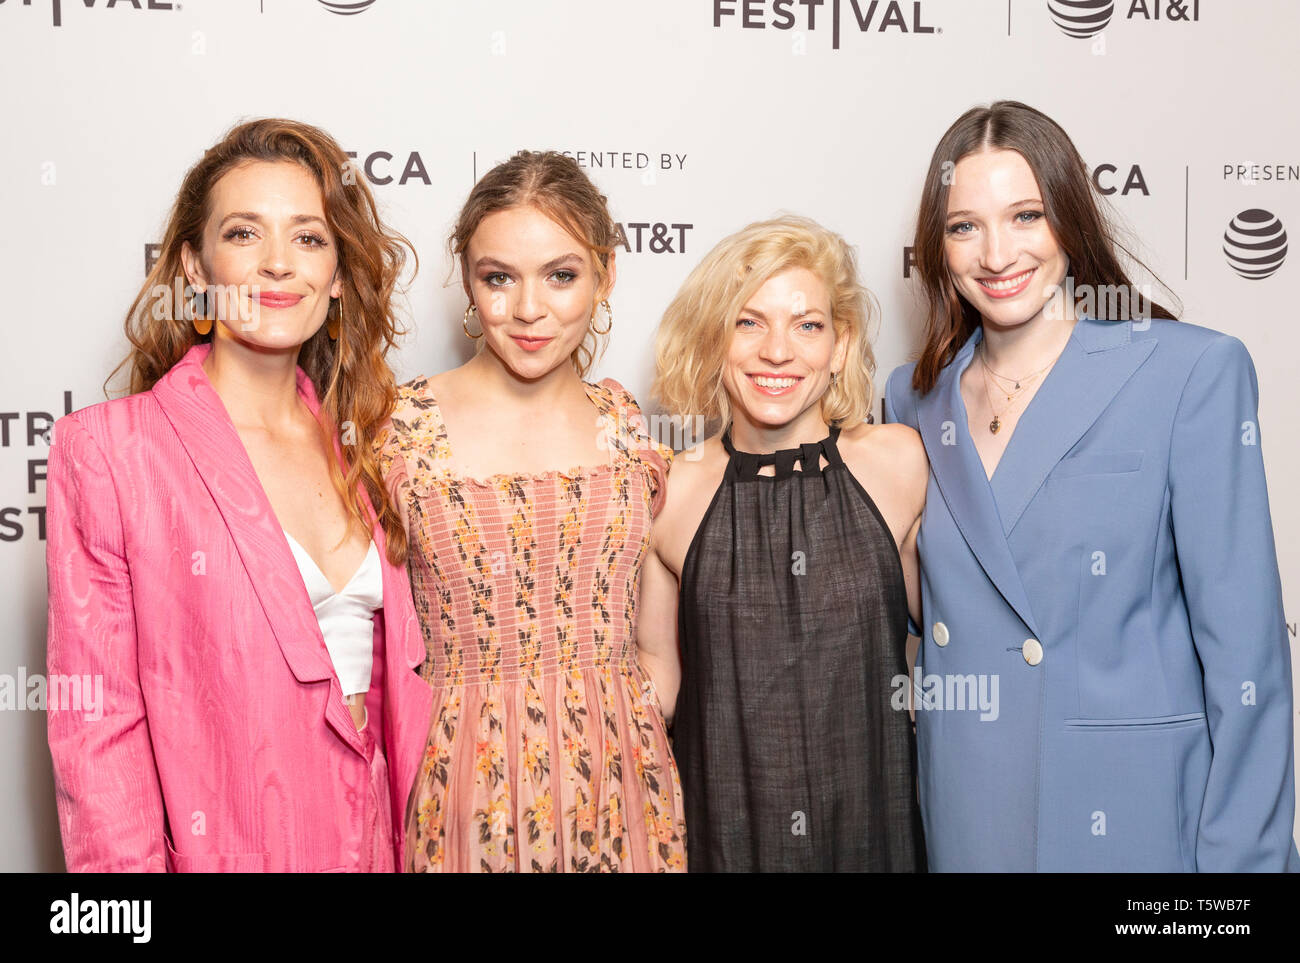 New York, NY - April 26, 2019: Danielle Krudy, Morgan Saylor, Bridget Savage Cole, Sophie Lowe attend the Blow The Man Down screening at Tribeca Film Festival at SVA Theatre Stock Photo